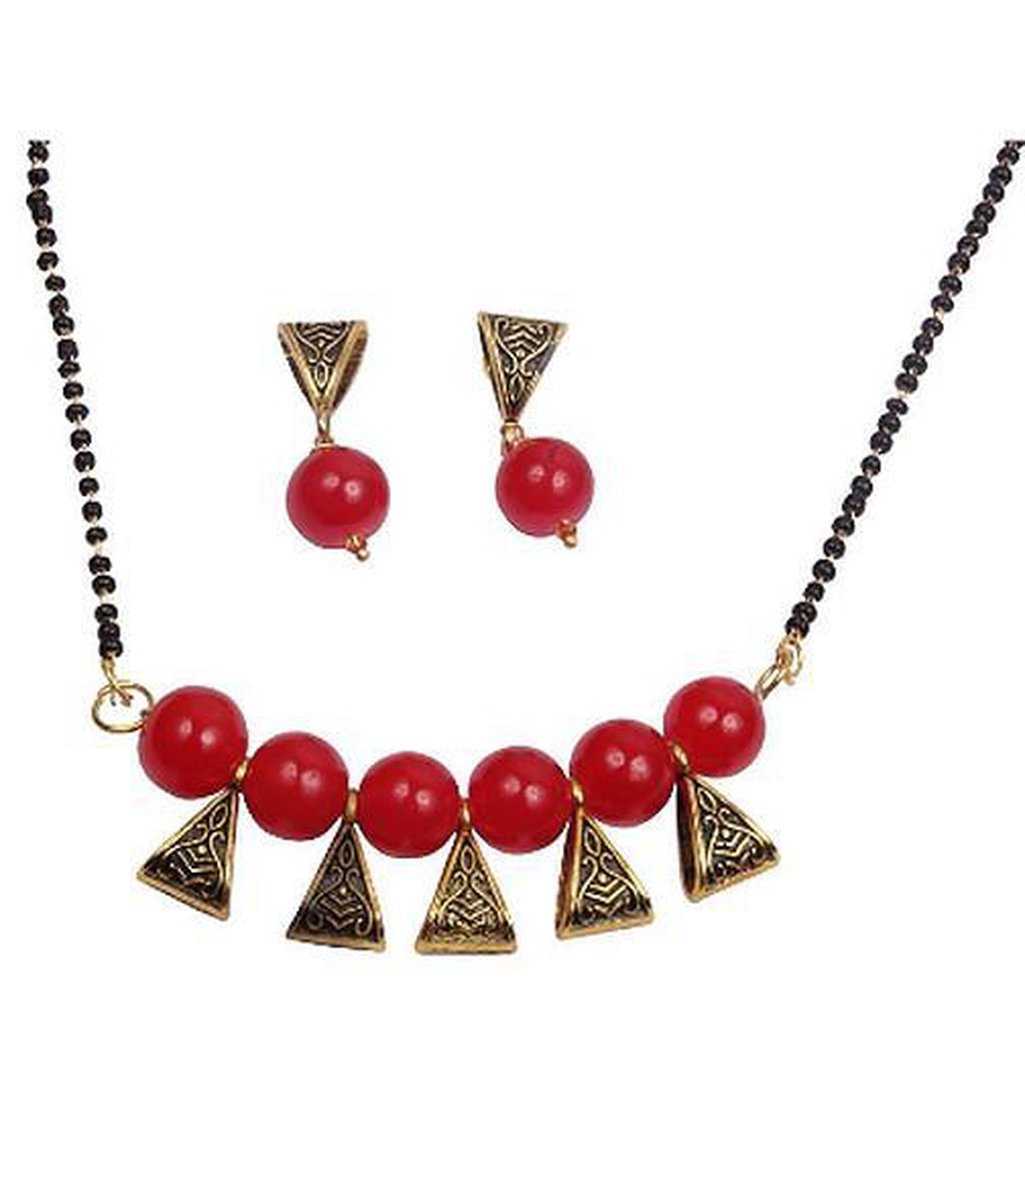 N3 Collecties Mangalsutra Ketting - Rood